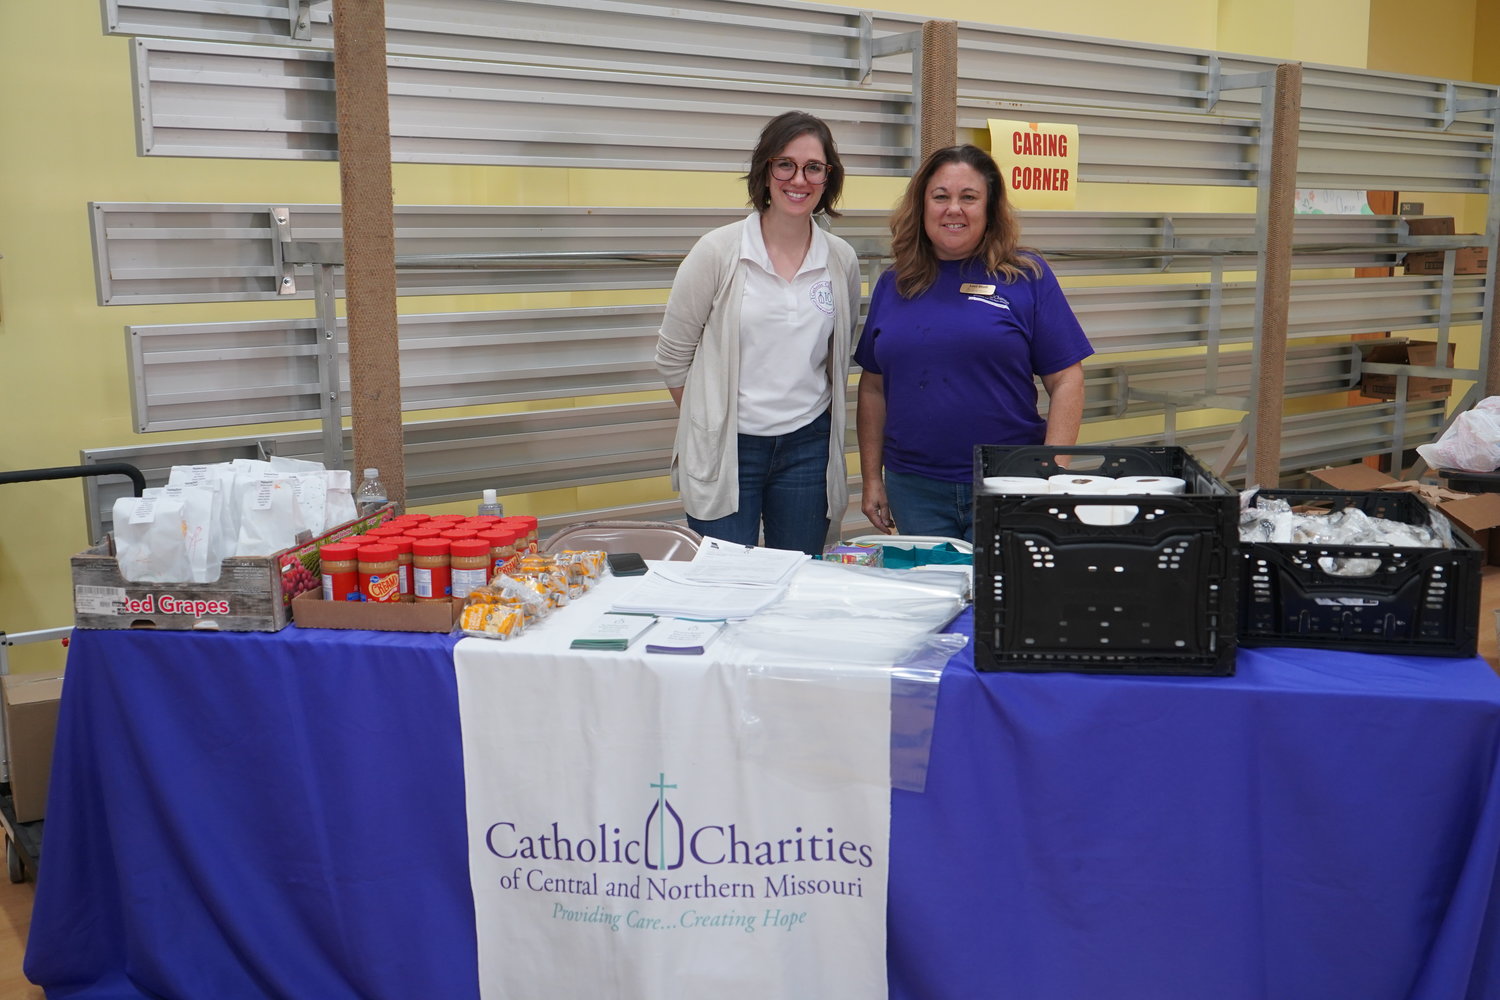 Ashley Wiskirchen, senior director of communications, and Lori Stoll, food programs coordinator, both for Catholic Charities of Central and Northern Missouri greet visitors to Project Homeless Connect on Sept. 30 in Jefferson City. Catholic Charities offered a selection of snacks and personal hygiene items, along with information about available services, to people who are homeless or near-homeless.